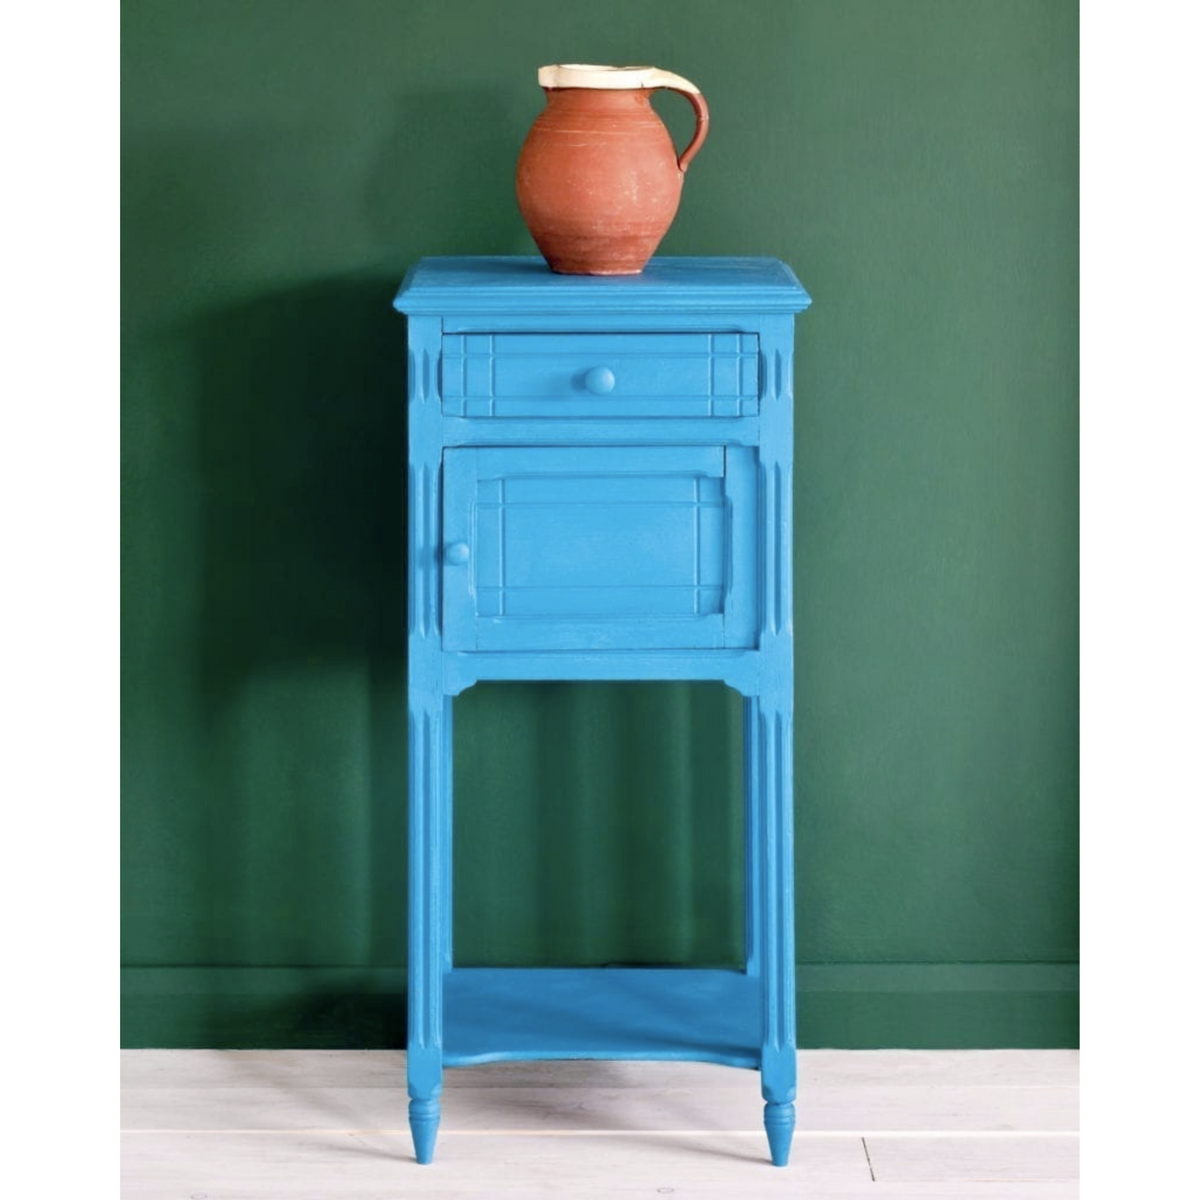 Annie Sloan CHALK PAINT® – Giverny